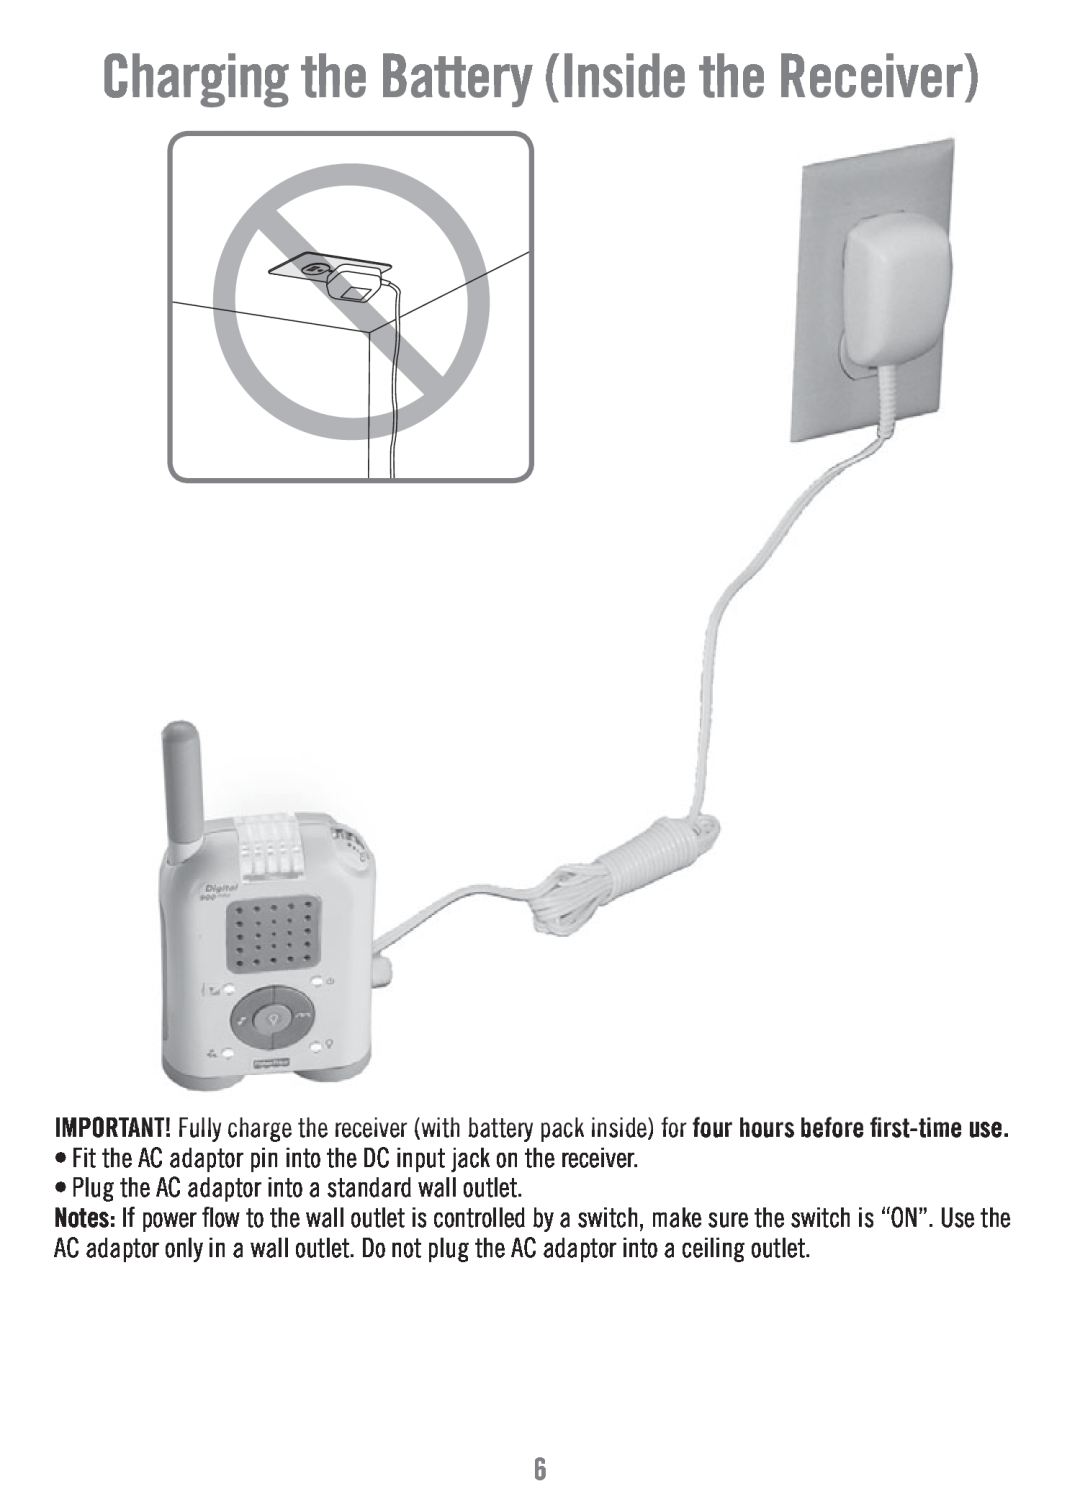 Fisher-Price P6584 manual Charging the Battery Inside the Receiver, Plug the AC adaptor into a standard wall outlet 